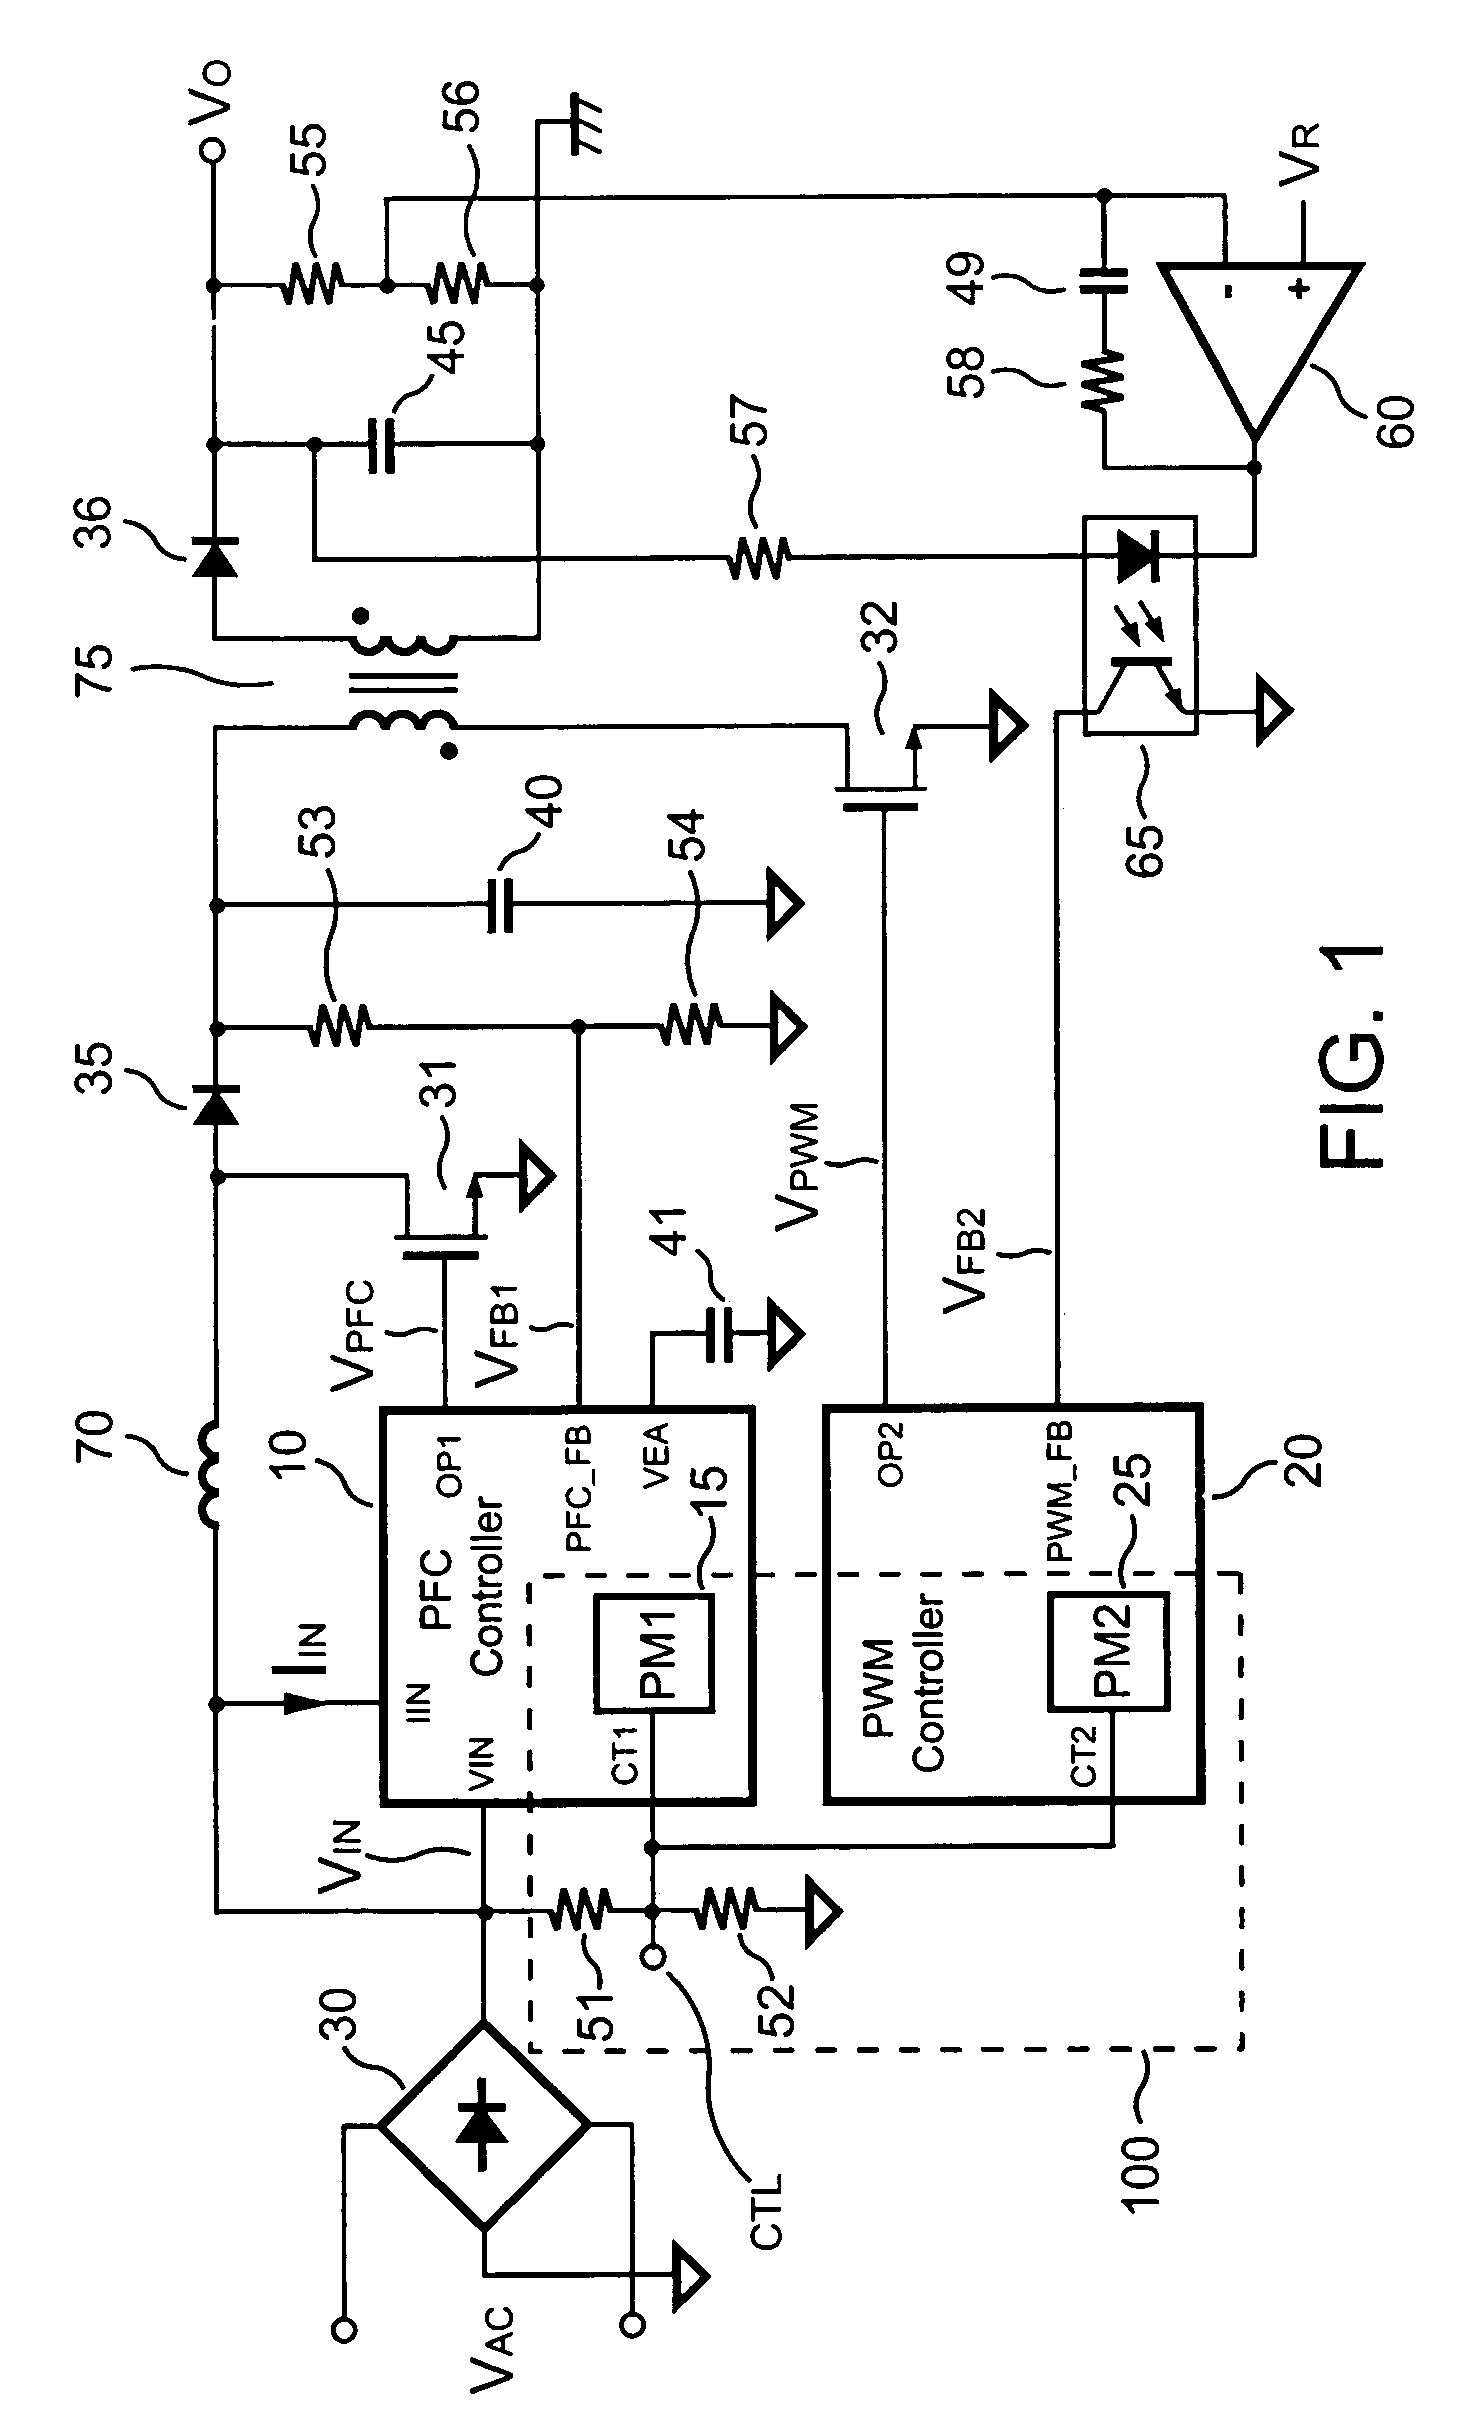 Apparatus for reducing the power consumption of a PFC-PWM power converter